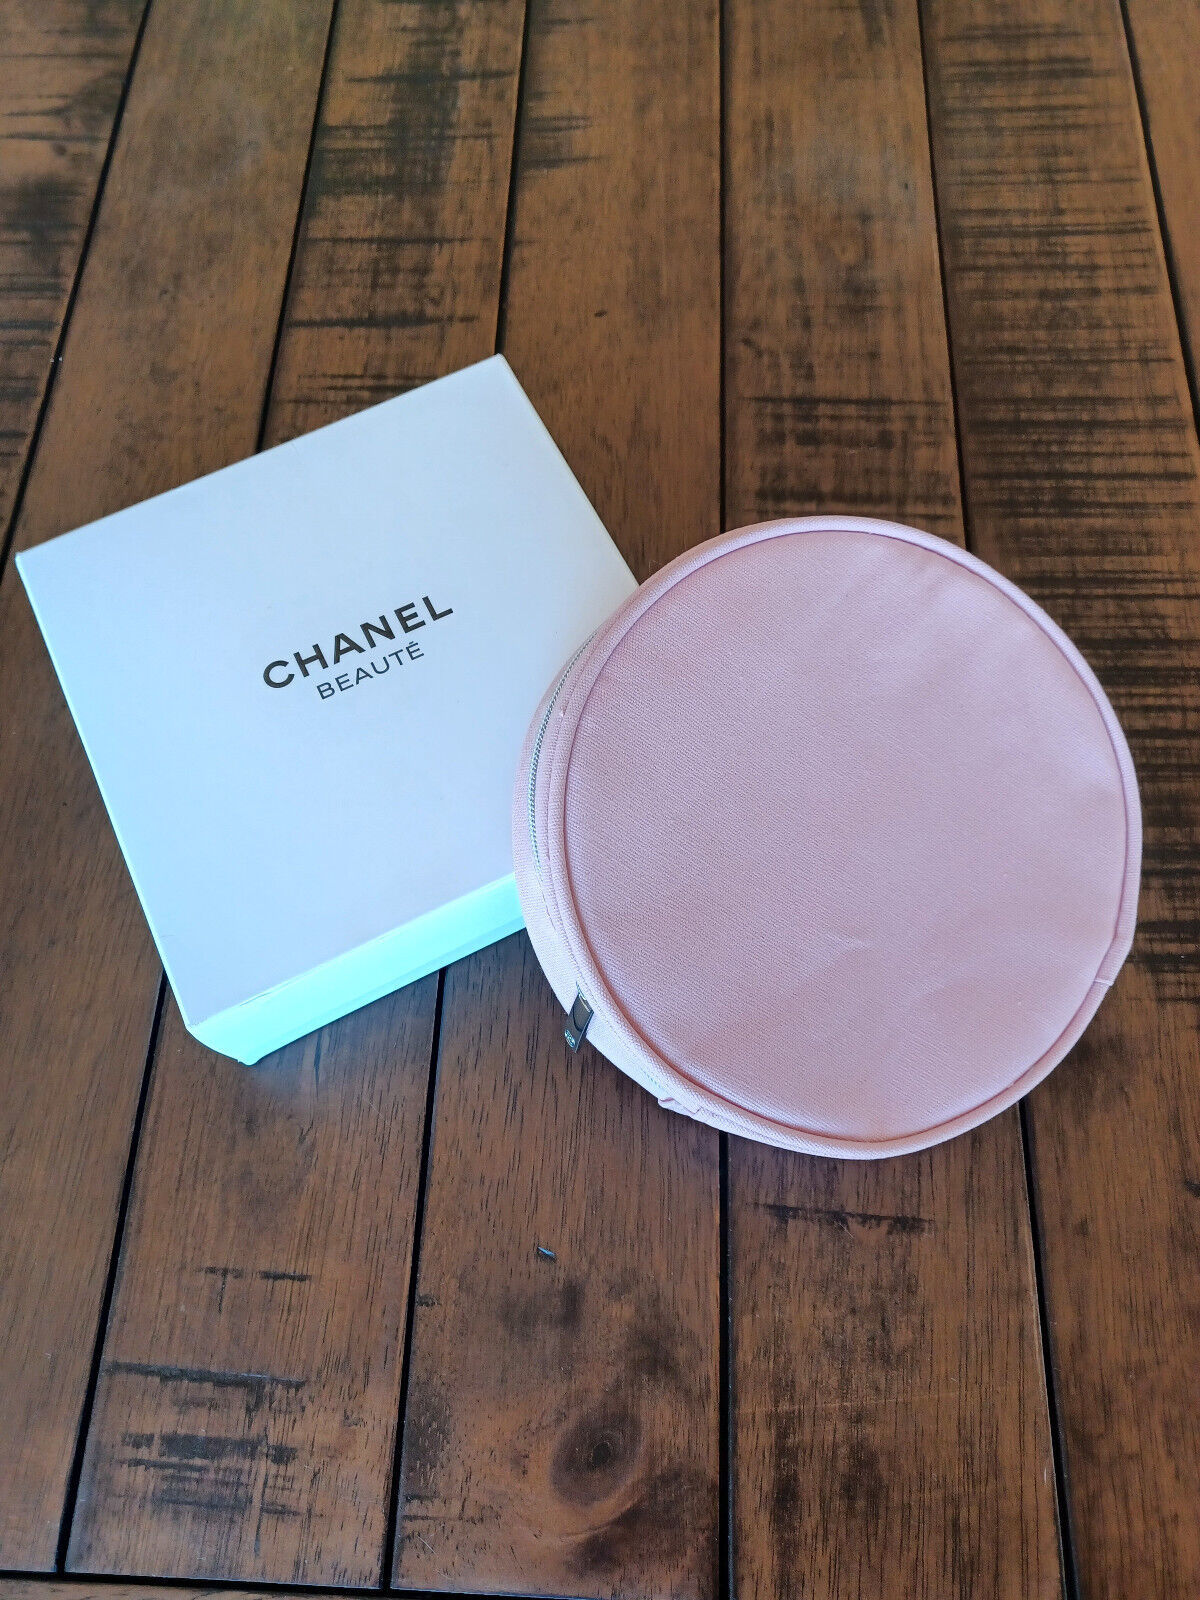 New Chanel Beaute Cosmetic Bag / Makeup Pouch and 50 similar items